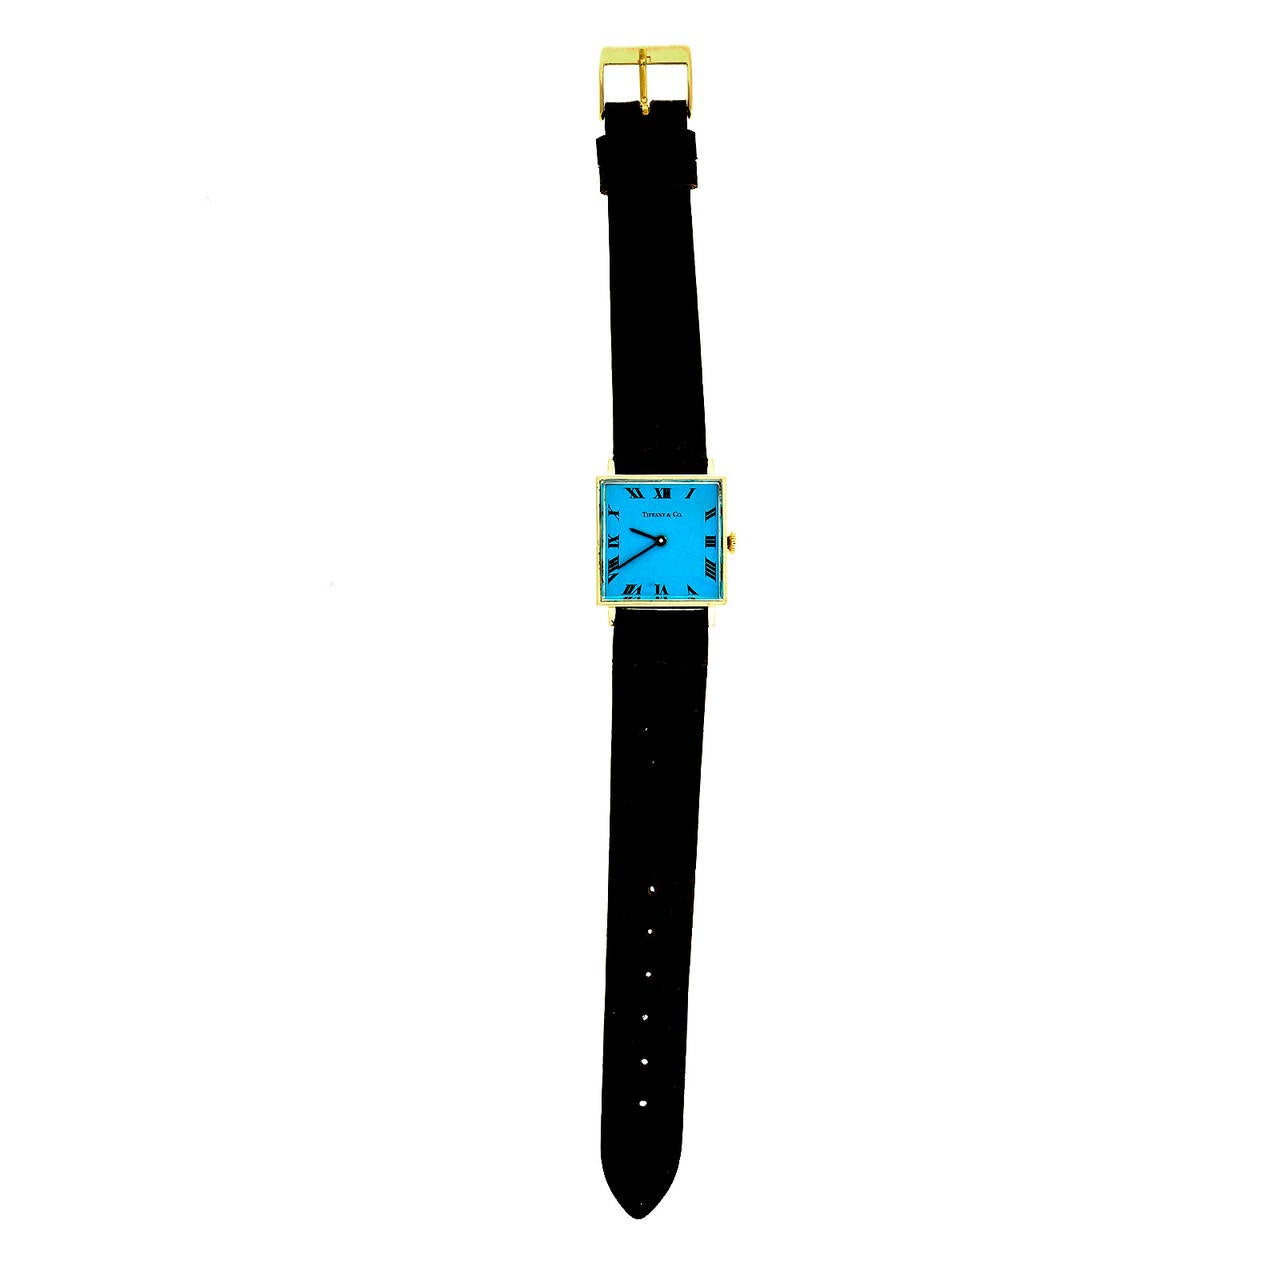 Tiffany & Co 14k yellow gold square wristwatch with custom-colored dial and manual-wind movement, circa 1960s.

14k yellow gold 
Length: 32.59mm 
Width: 25.32mm
Case thickness: 7.6mm 
Strap width at case: 18mm 
Dial: refinished